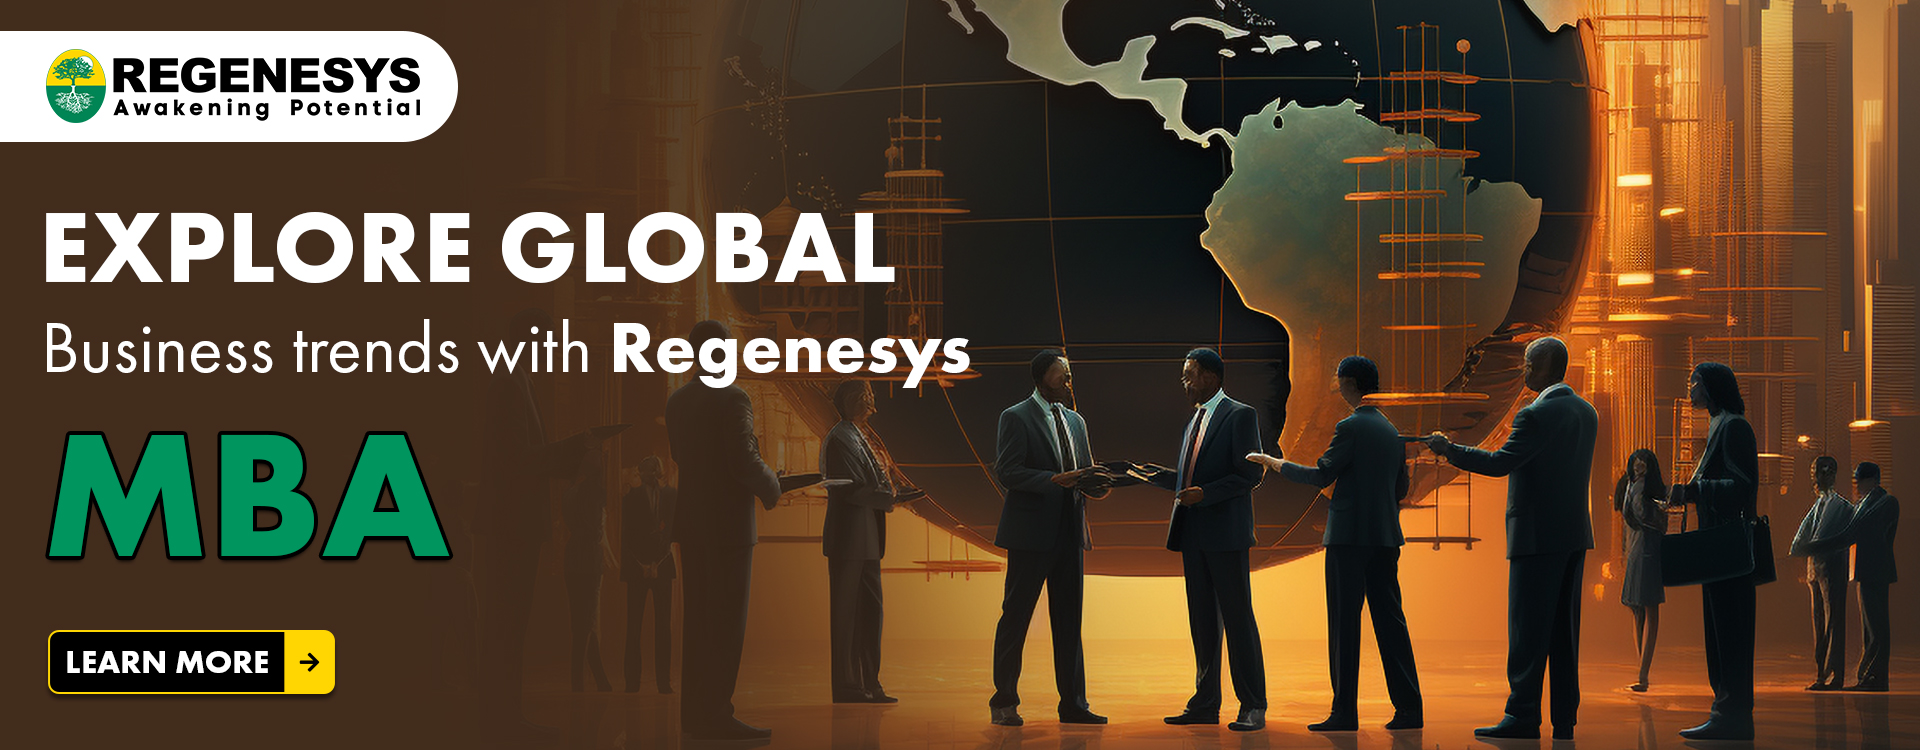 Explore global business trends with Regenesys' MBA. | Gain insights now.